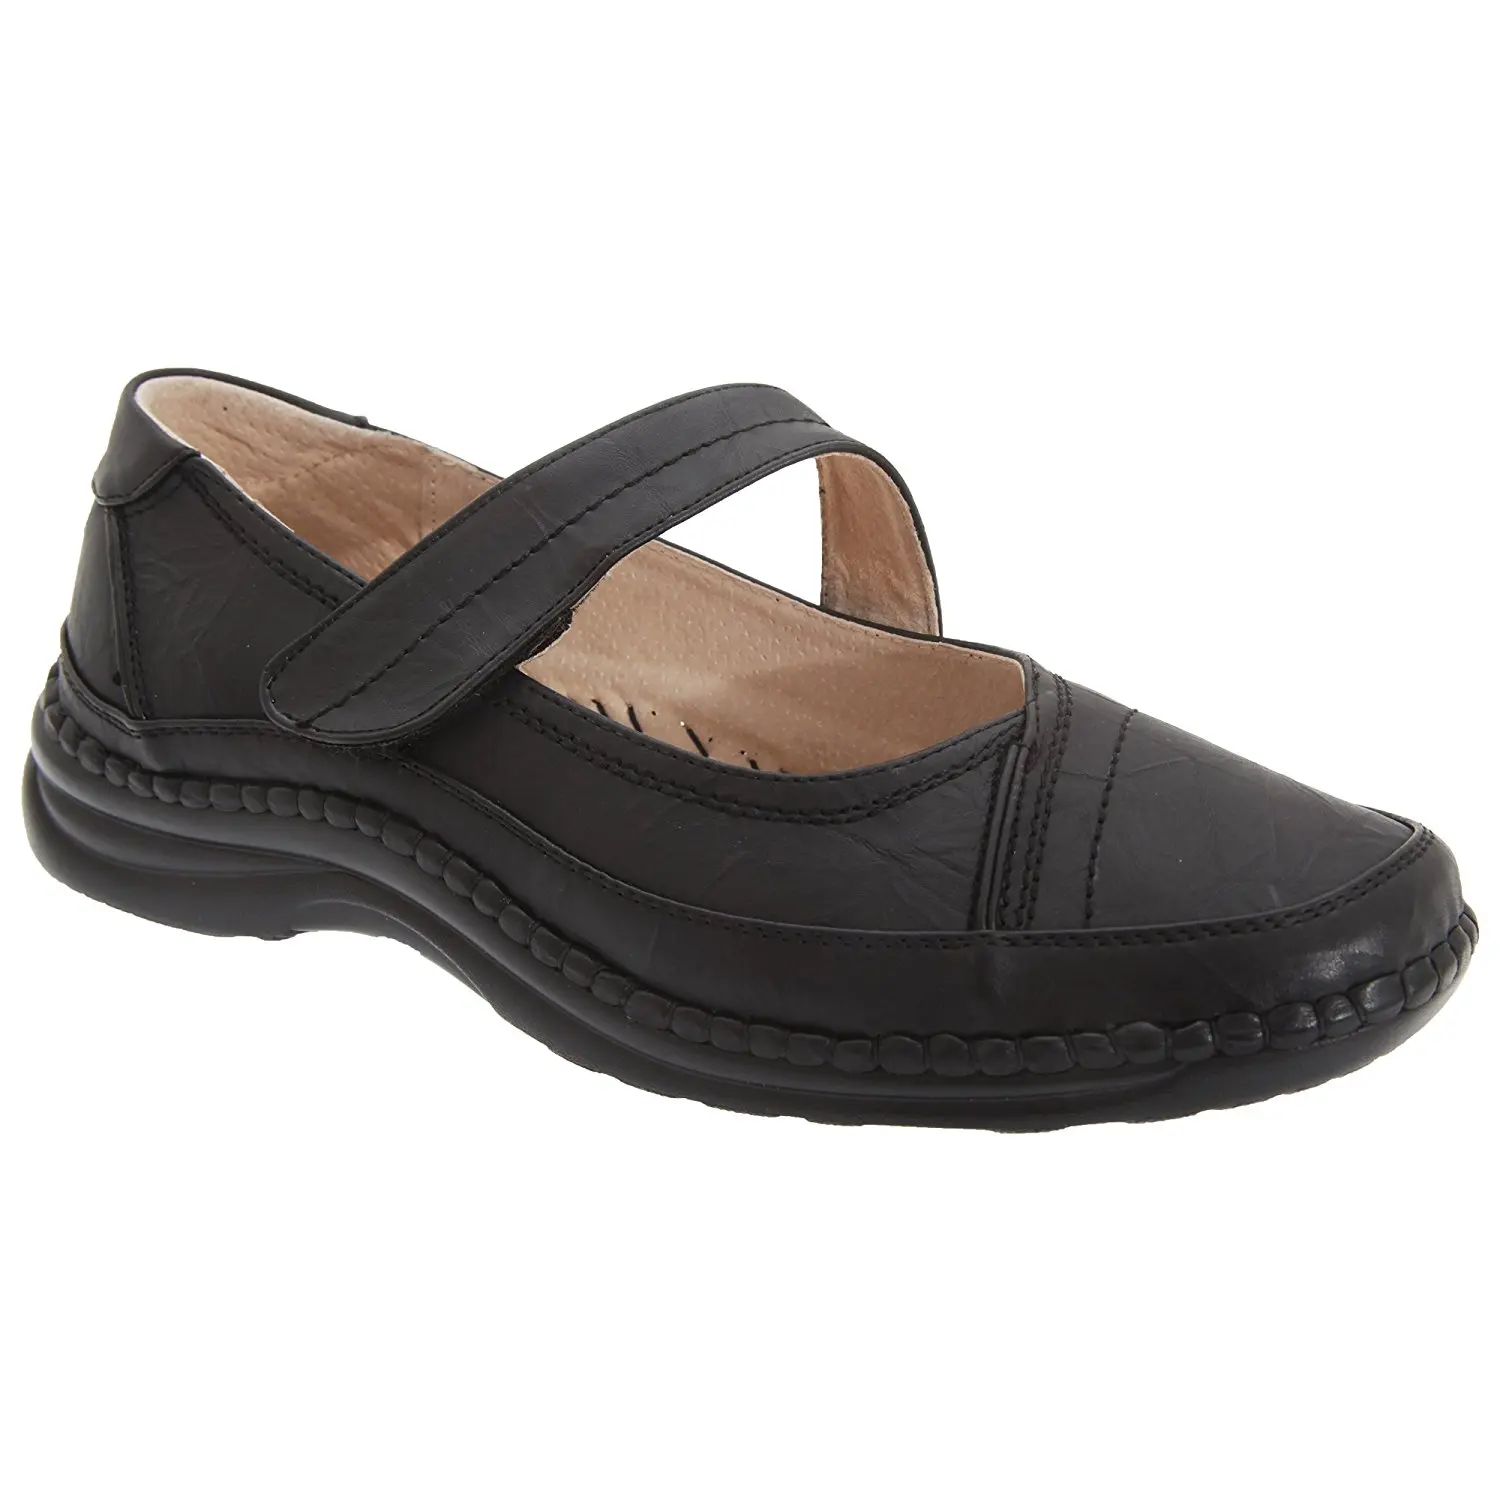 clarks wide fit shoes for ladies